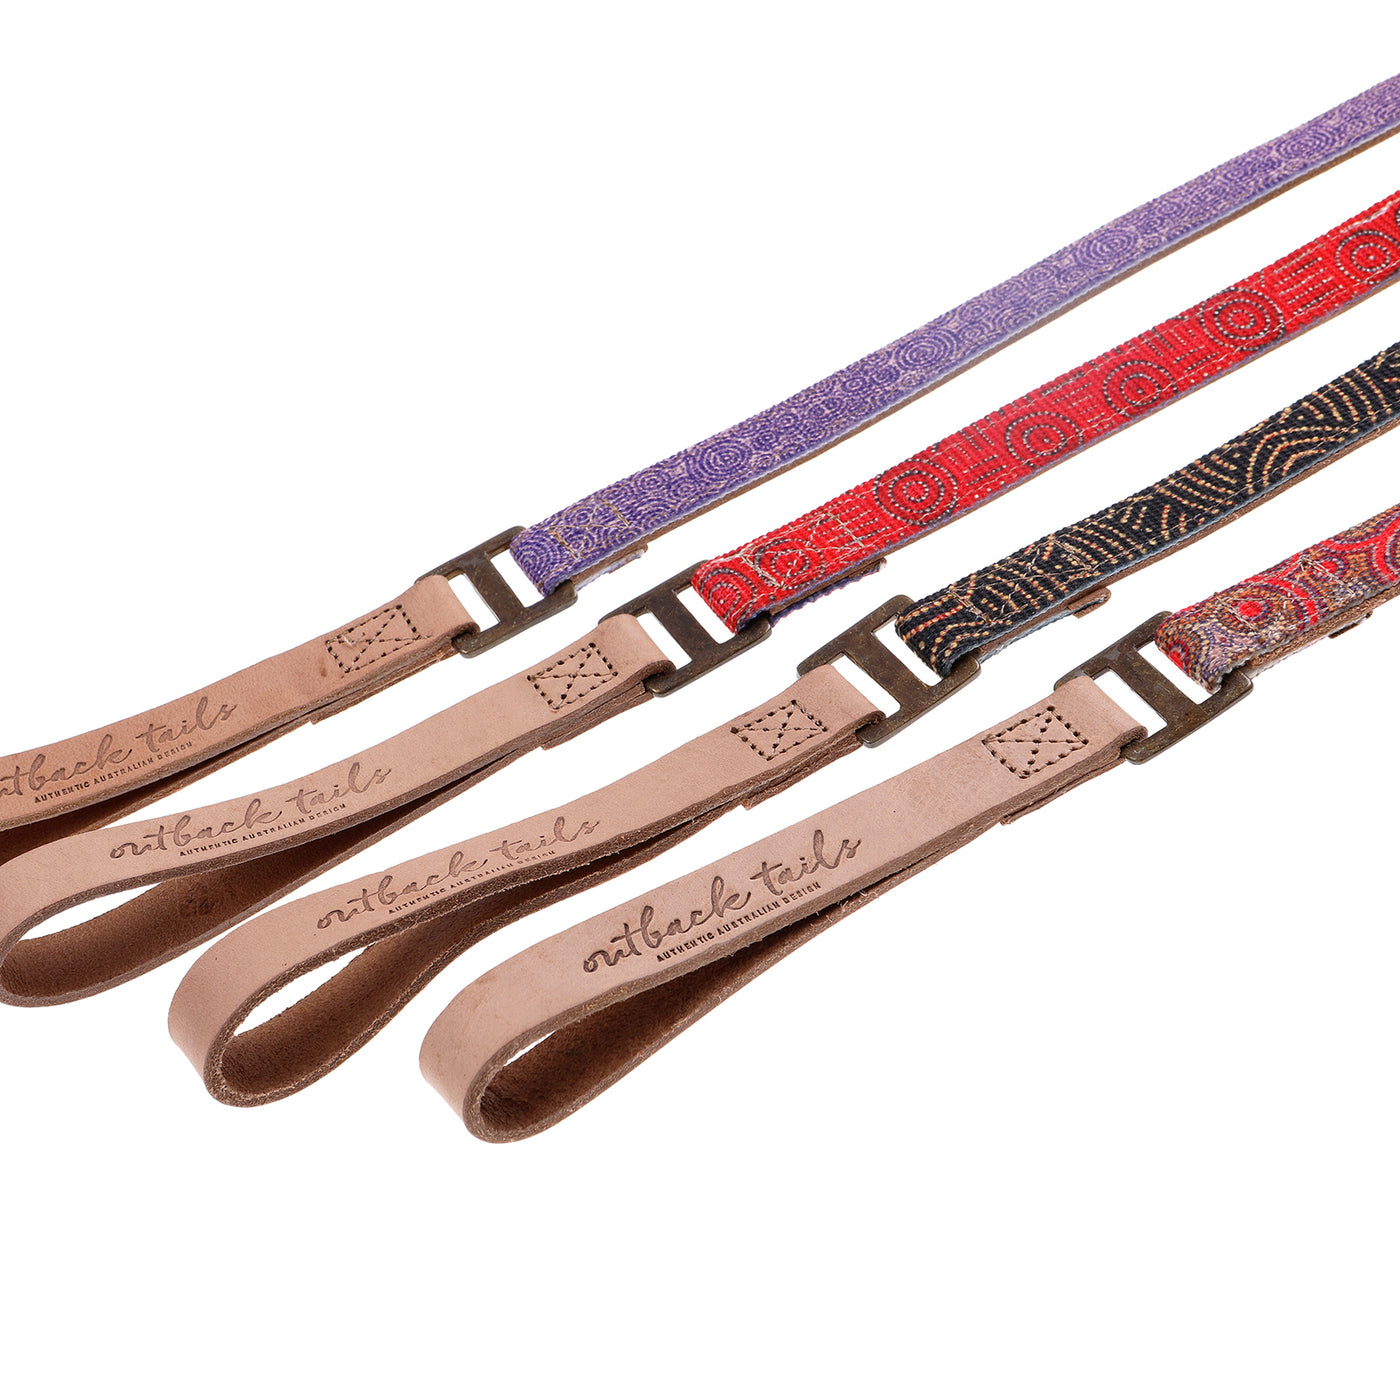 All Leather Leads